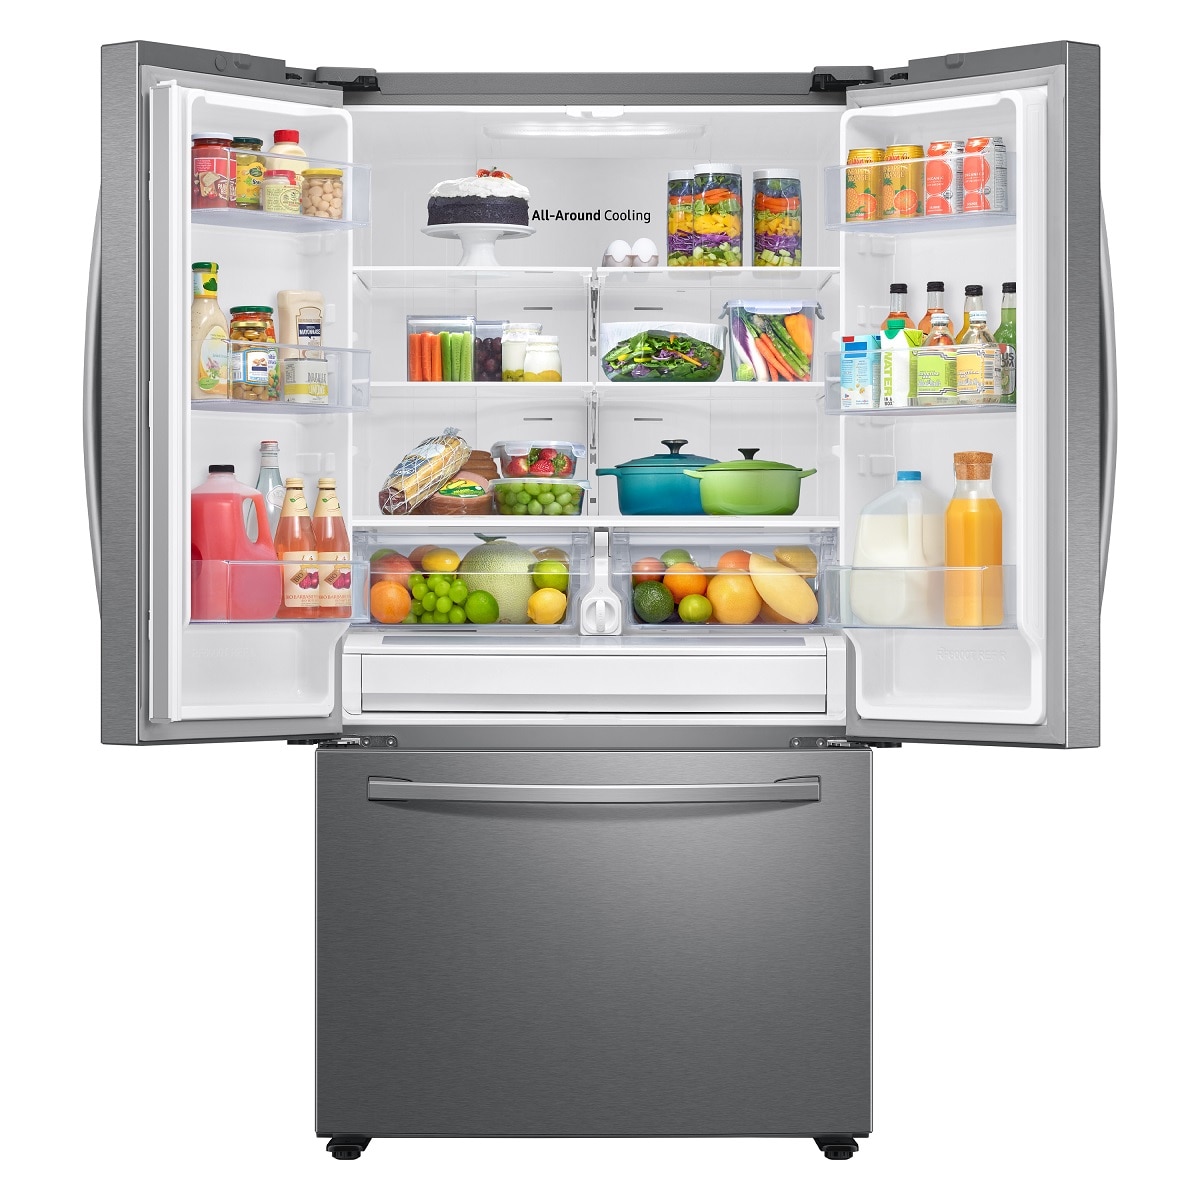 Samsung 28 2 Cu Ft French Door Refrigerator With Ice Maker Fingerprint Resistant Stainless Steel Energy Star In The French Door Refrigerators Department At Lowes Com